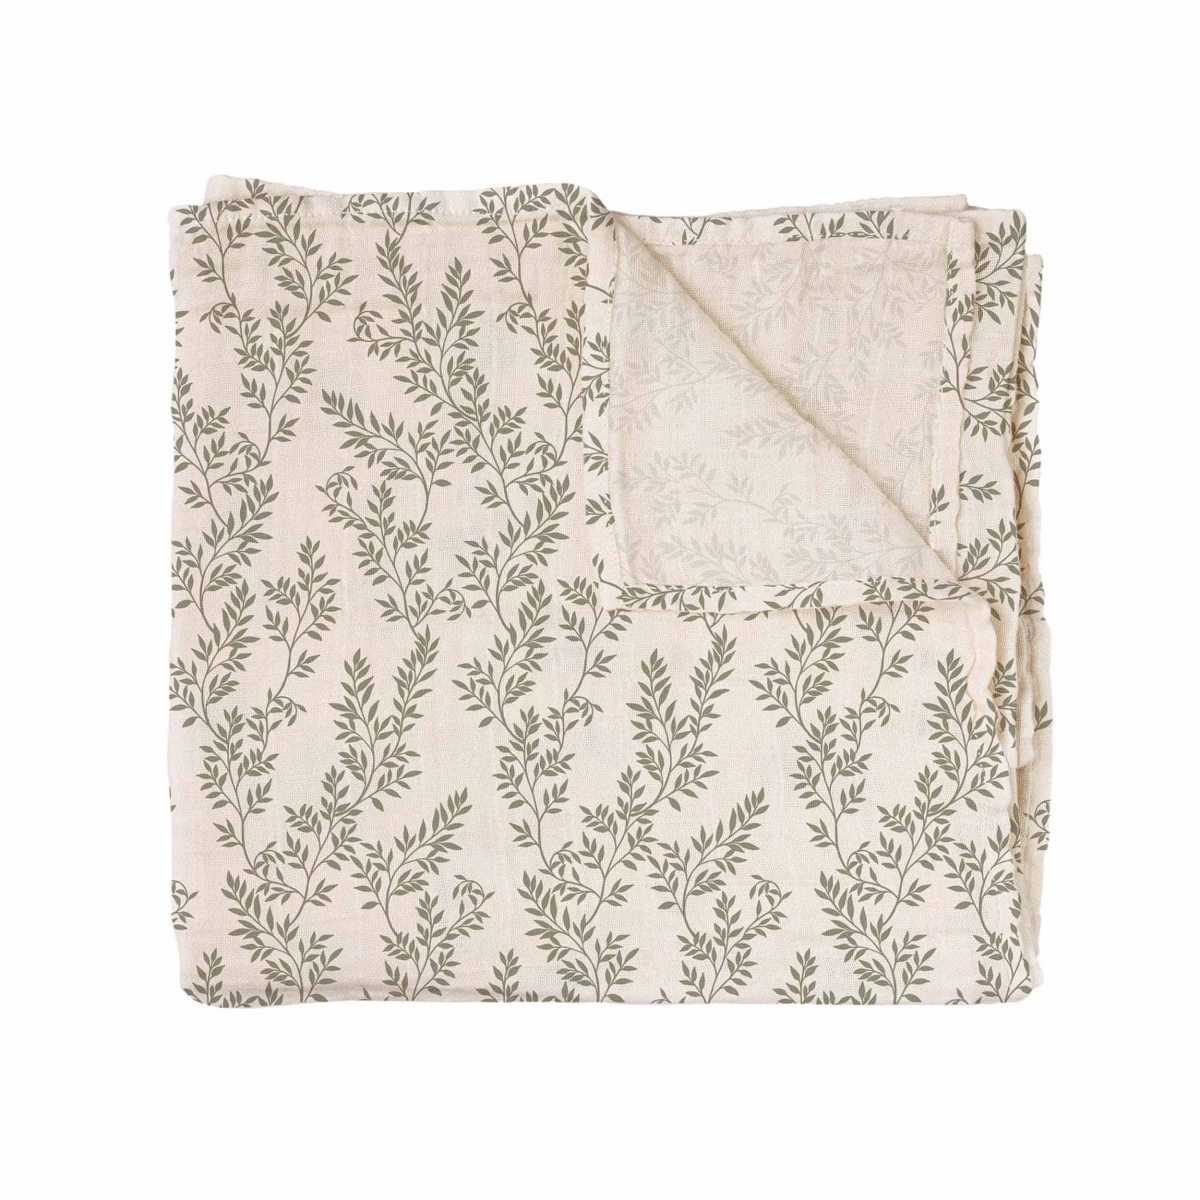 Main Sauvage - Bay Leaves Muslin Swaddle ecru - Blankets and diapers - 5604892044316 